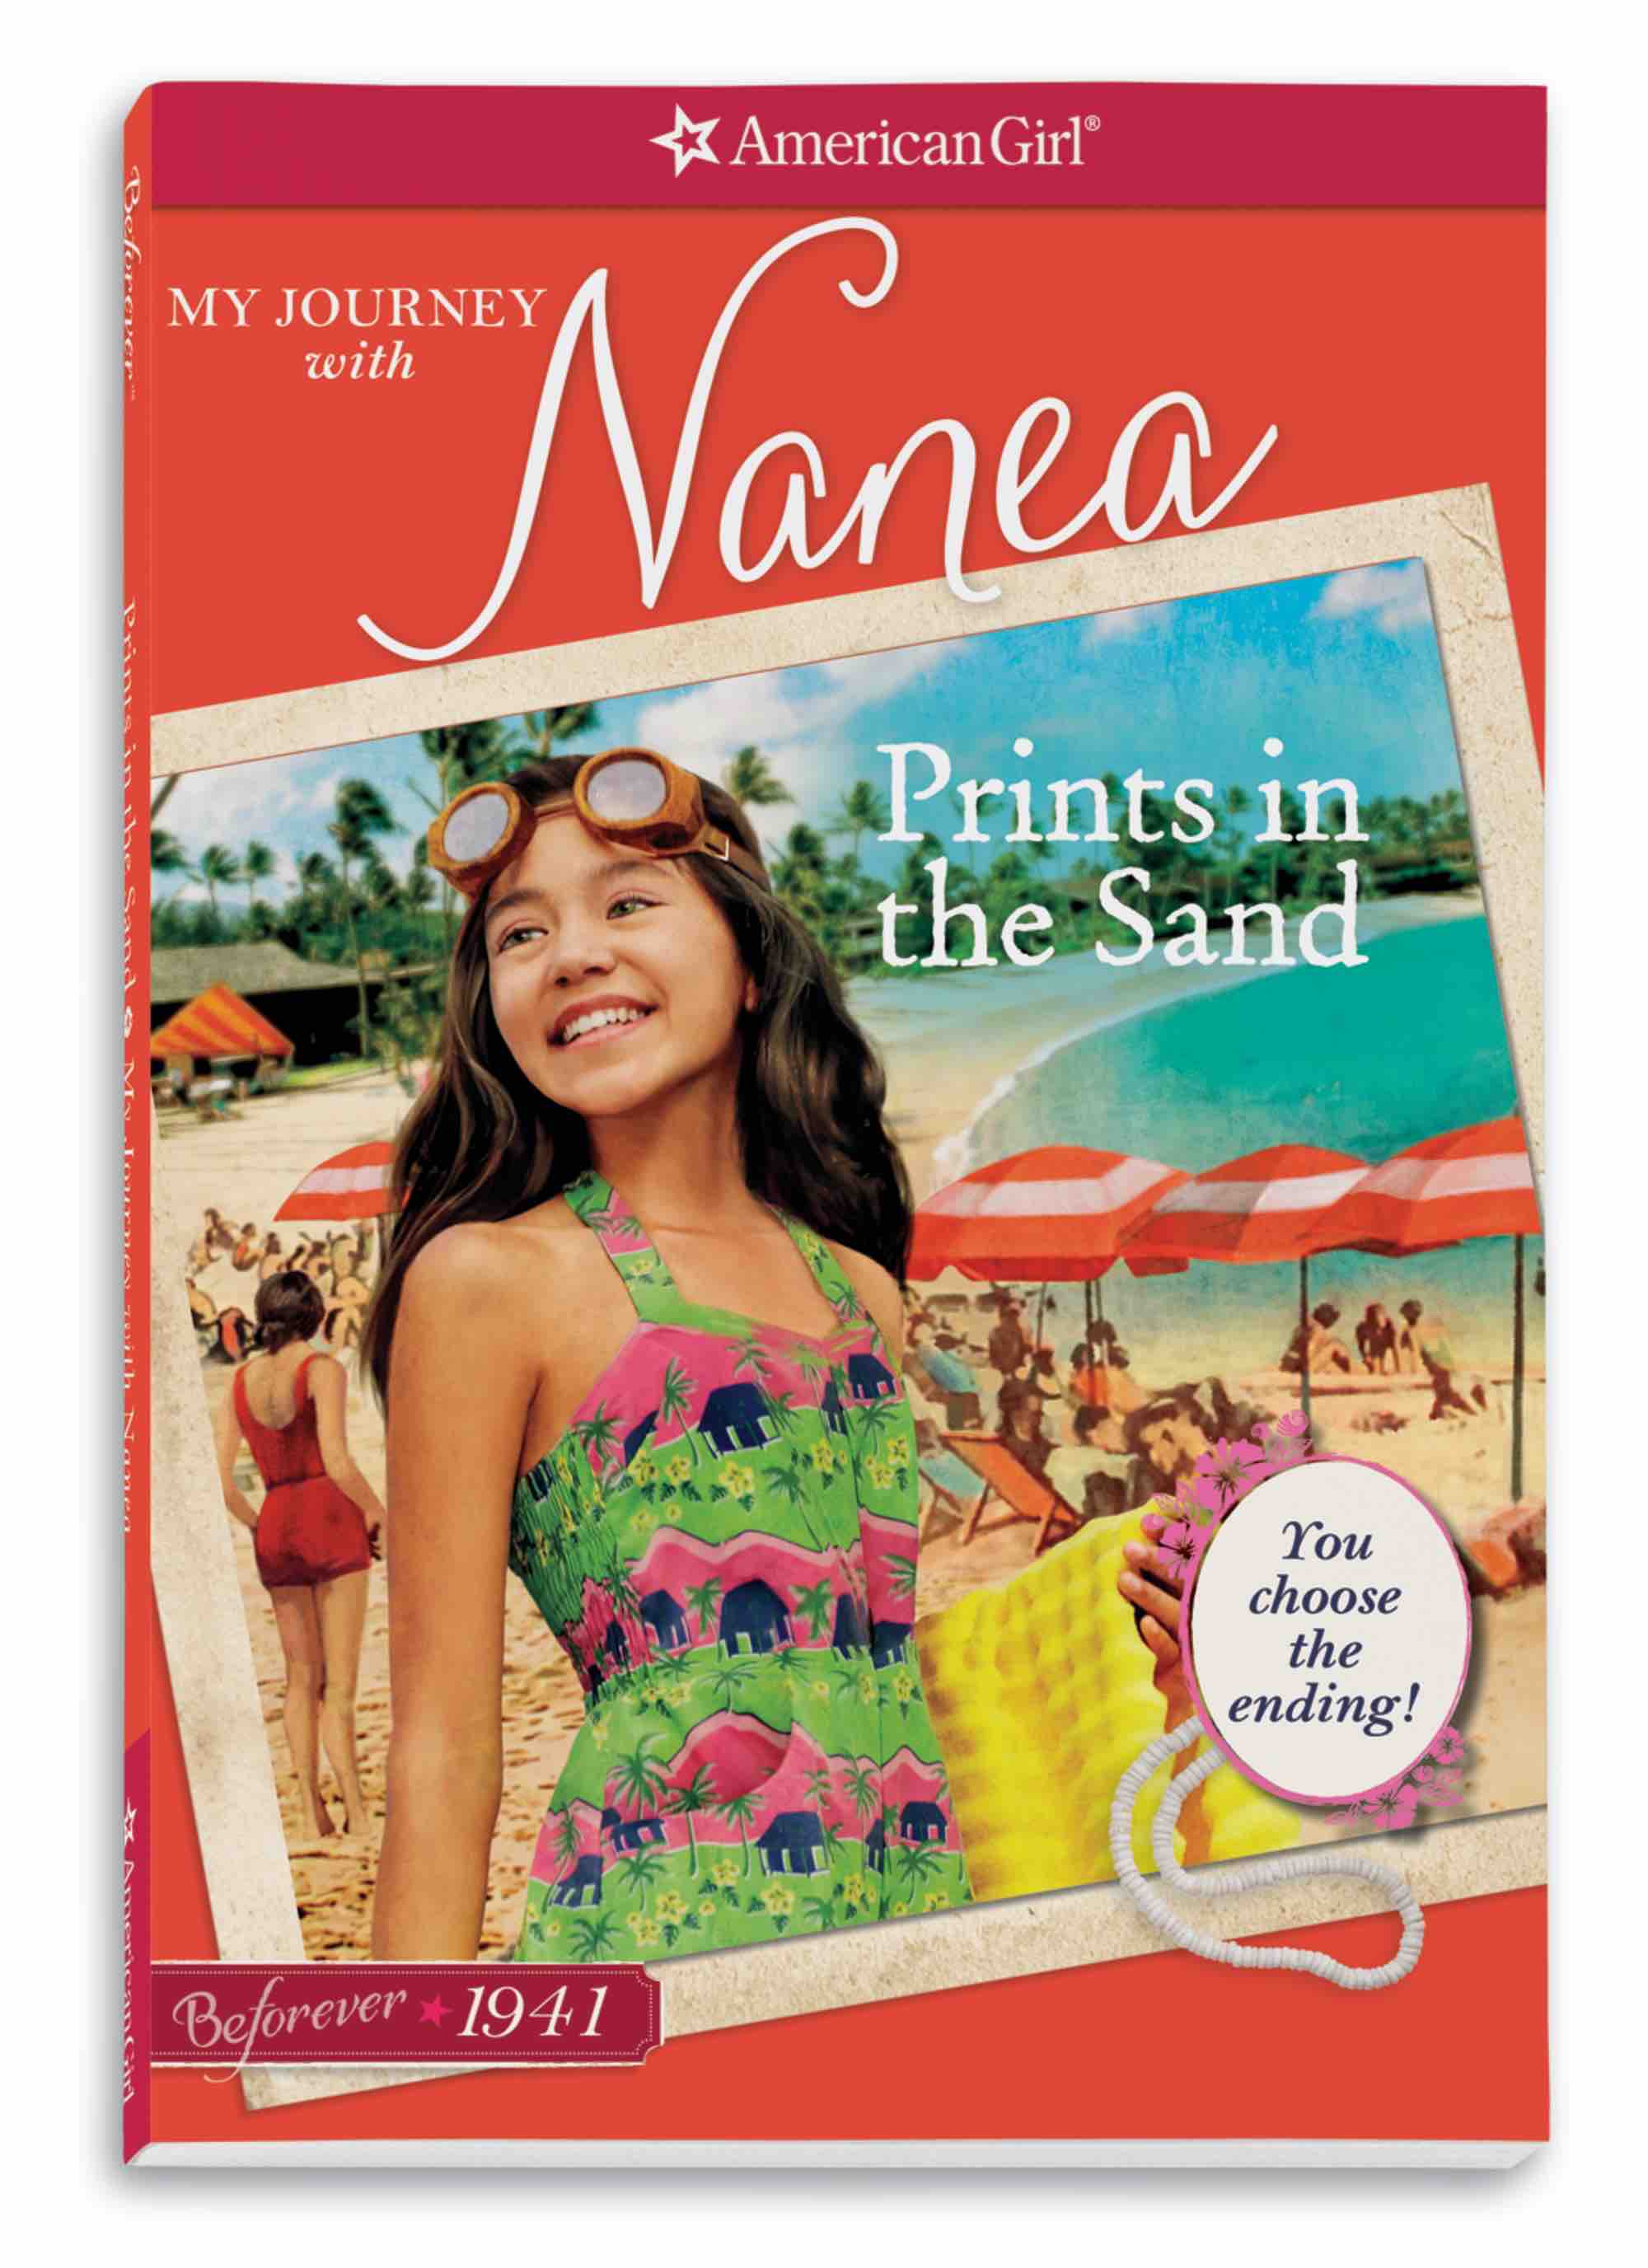 Doll and book review: American Girl's Nanea offers first-hand look at  Hawaii during WWII